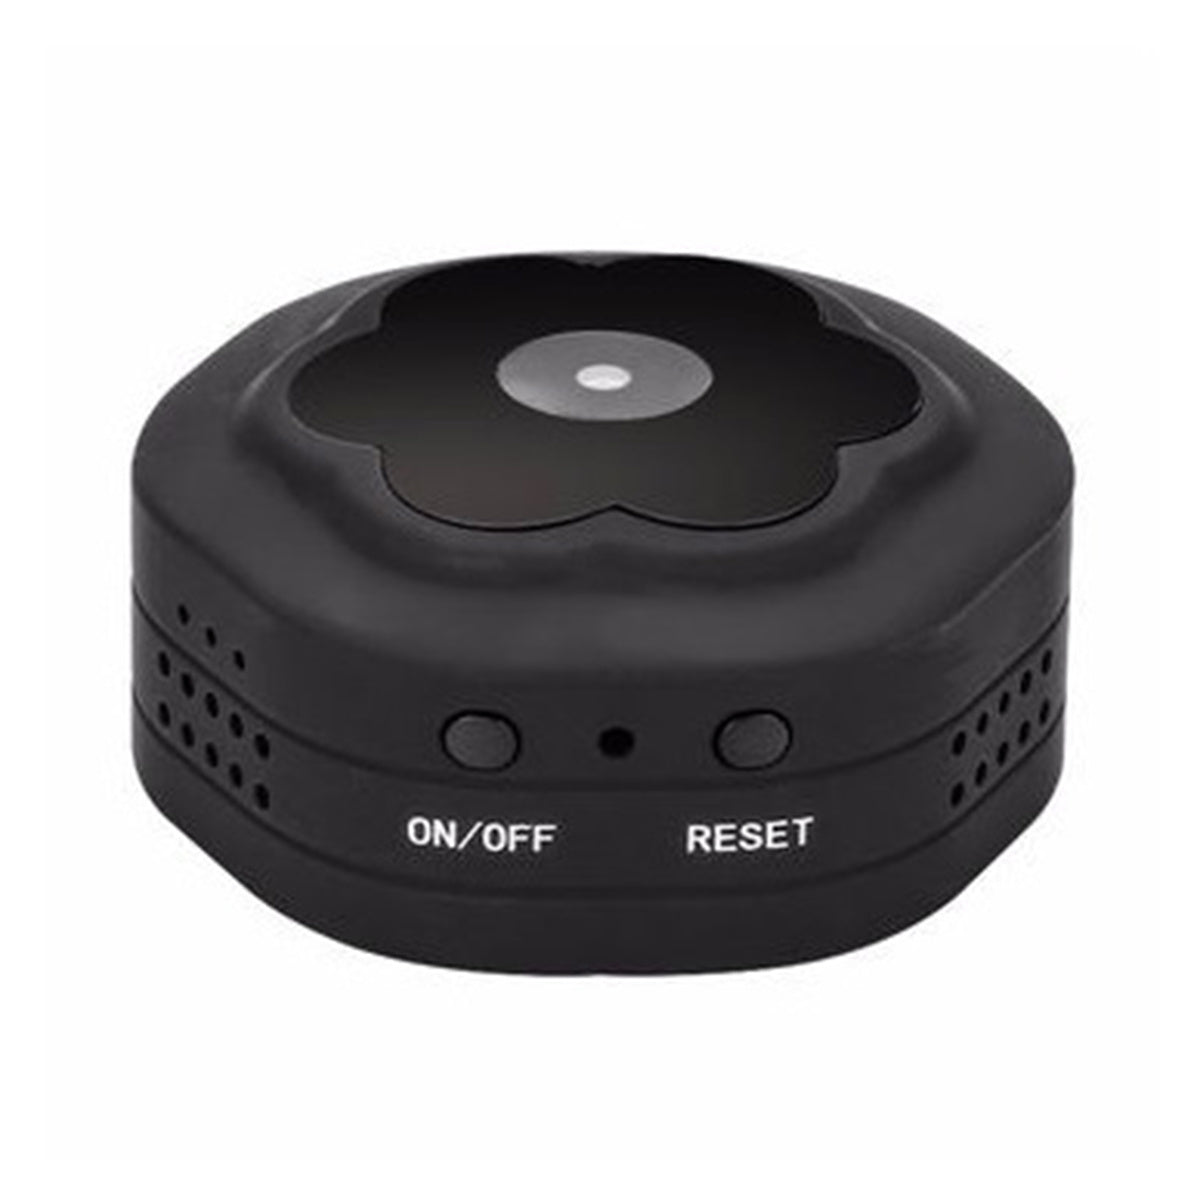 WM3 Mini Wireless WIFI Camera 1080P Infrared Night Vision Camera With Motion Detection For Home Monitoring Office Warehouse Car Etc built in 32GB